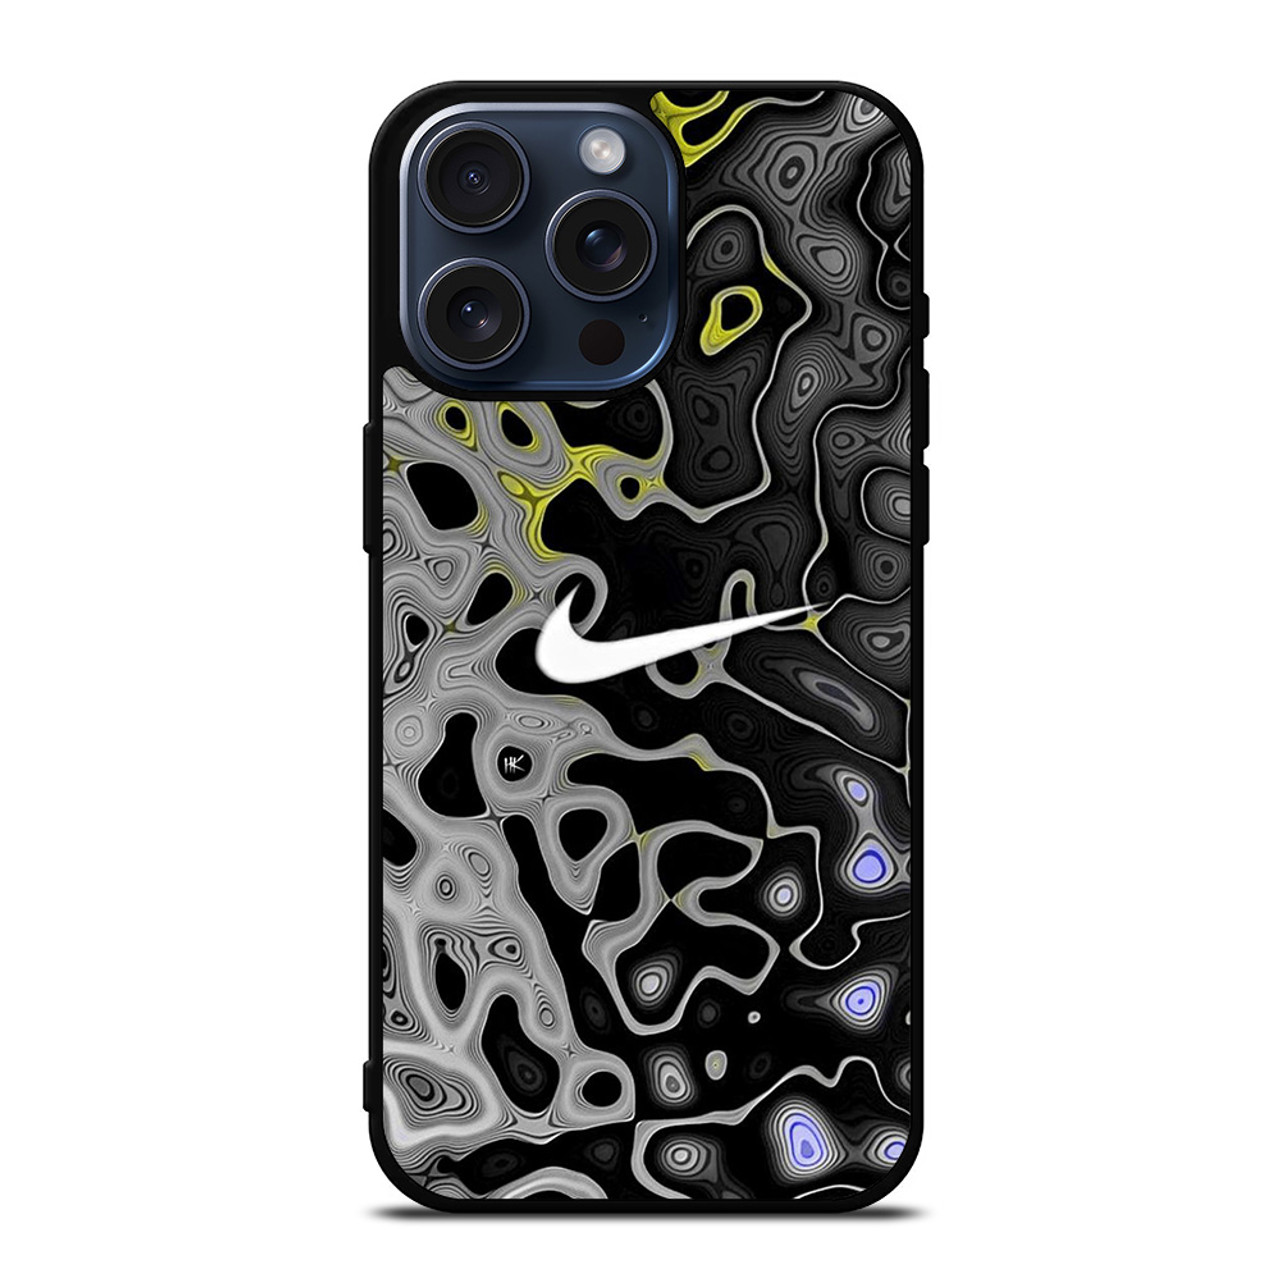 NIKE LOGO MARBLE iPhone XR Case Cover